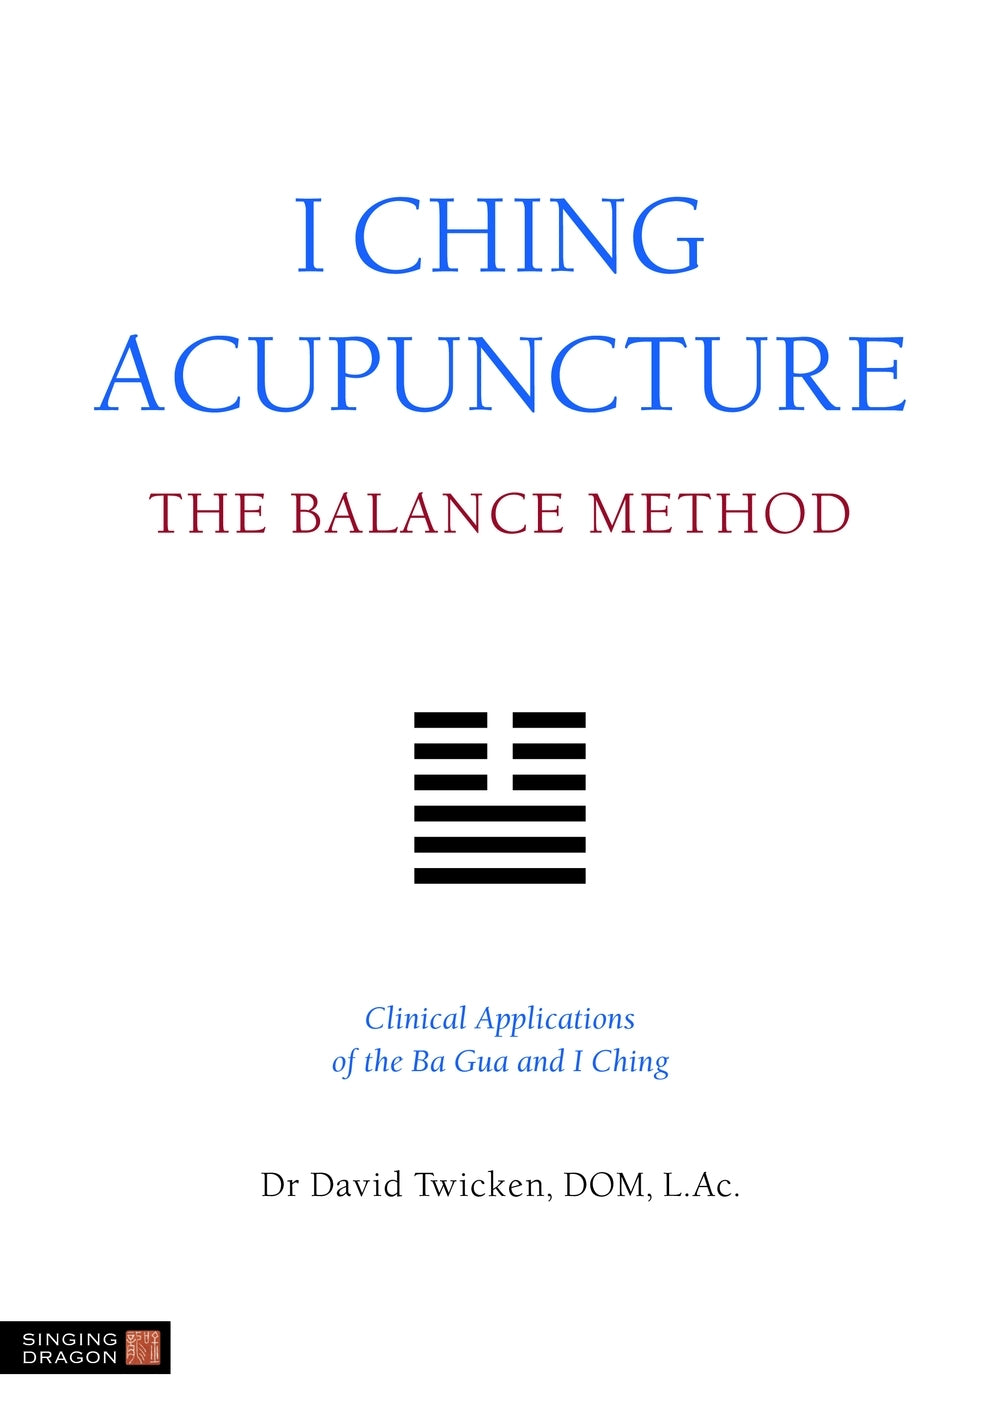 I Ching Acupuncture - The Balance Method by David Twicken